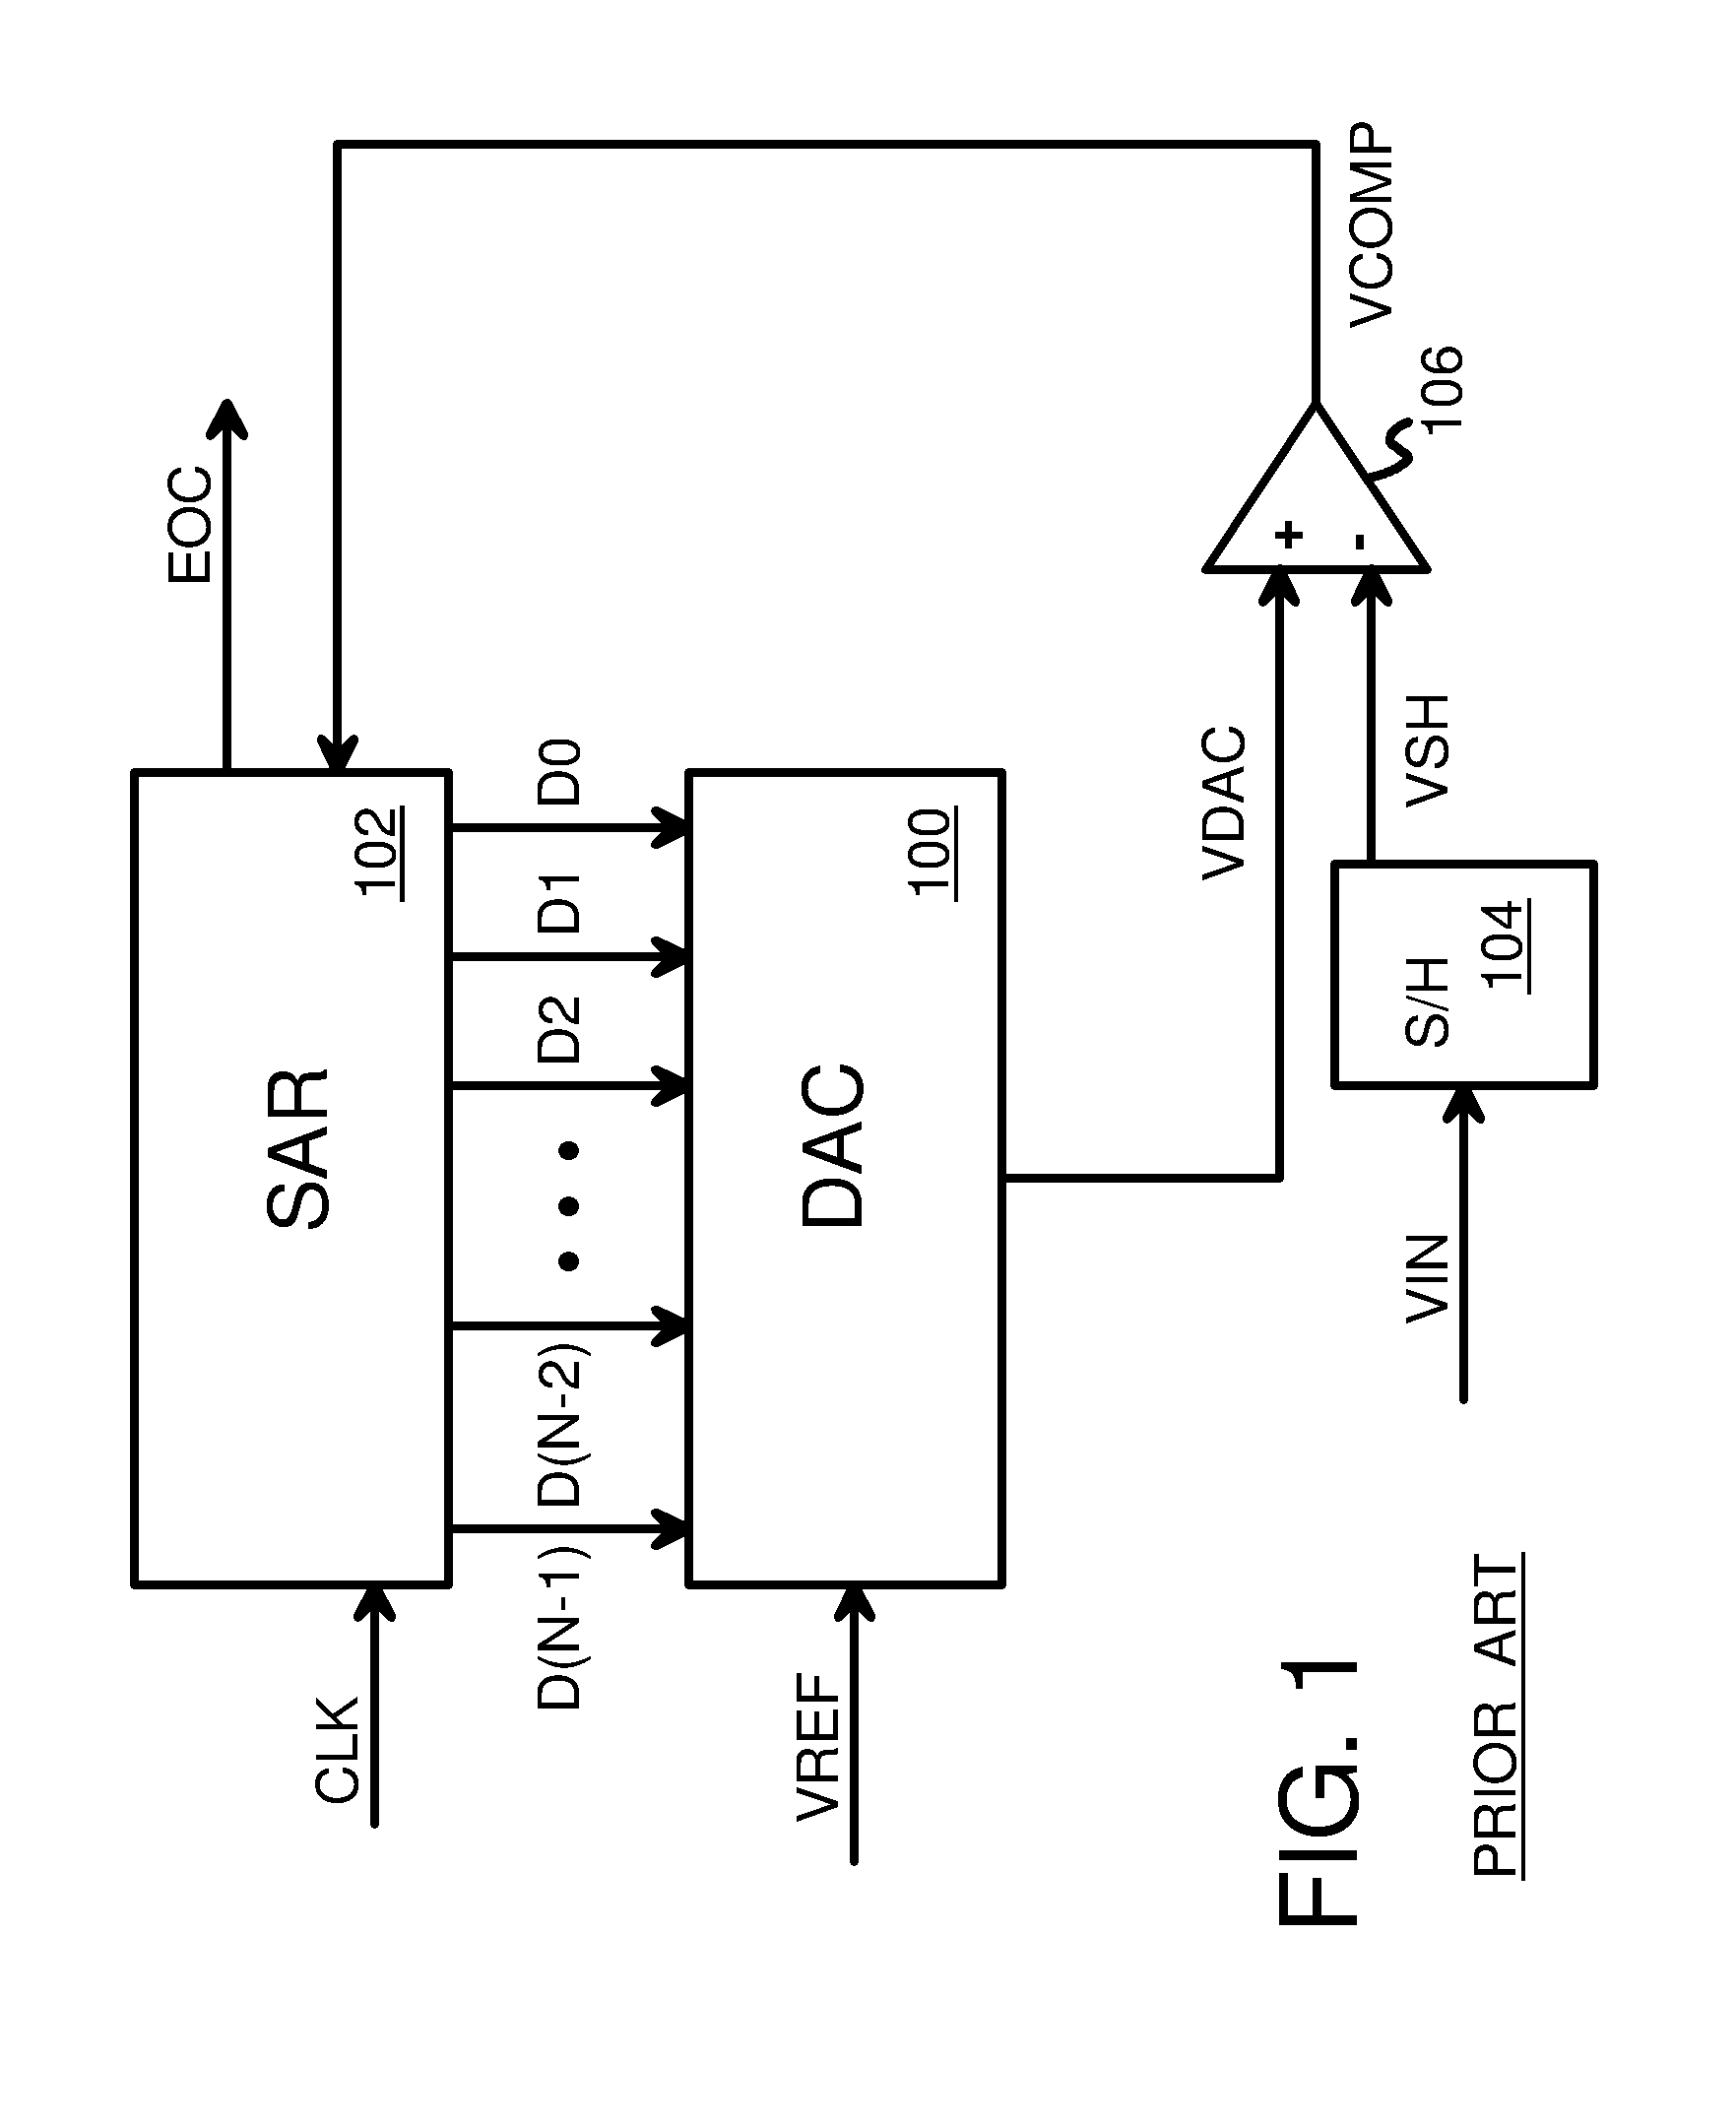 Asynchronous successive-approximation-register analog-to-digital converter (SAR ADC) in synchronized system